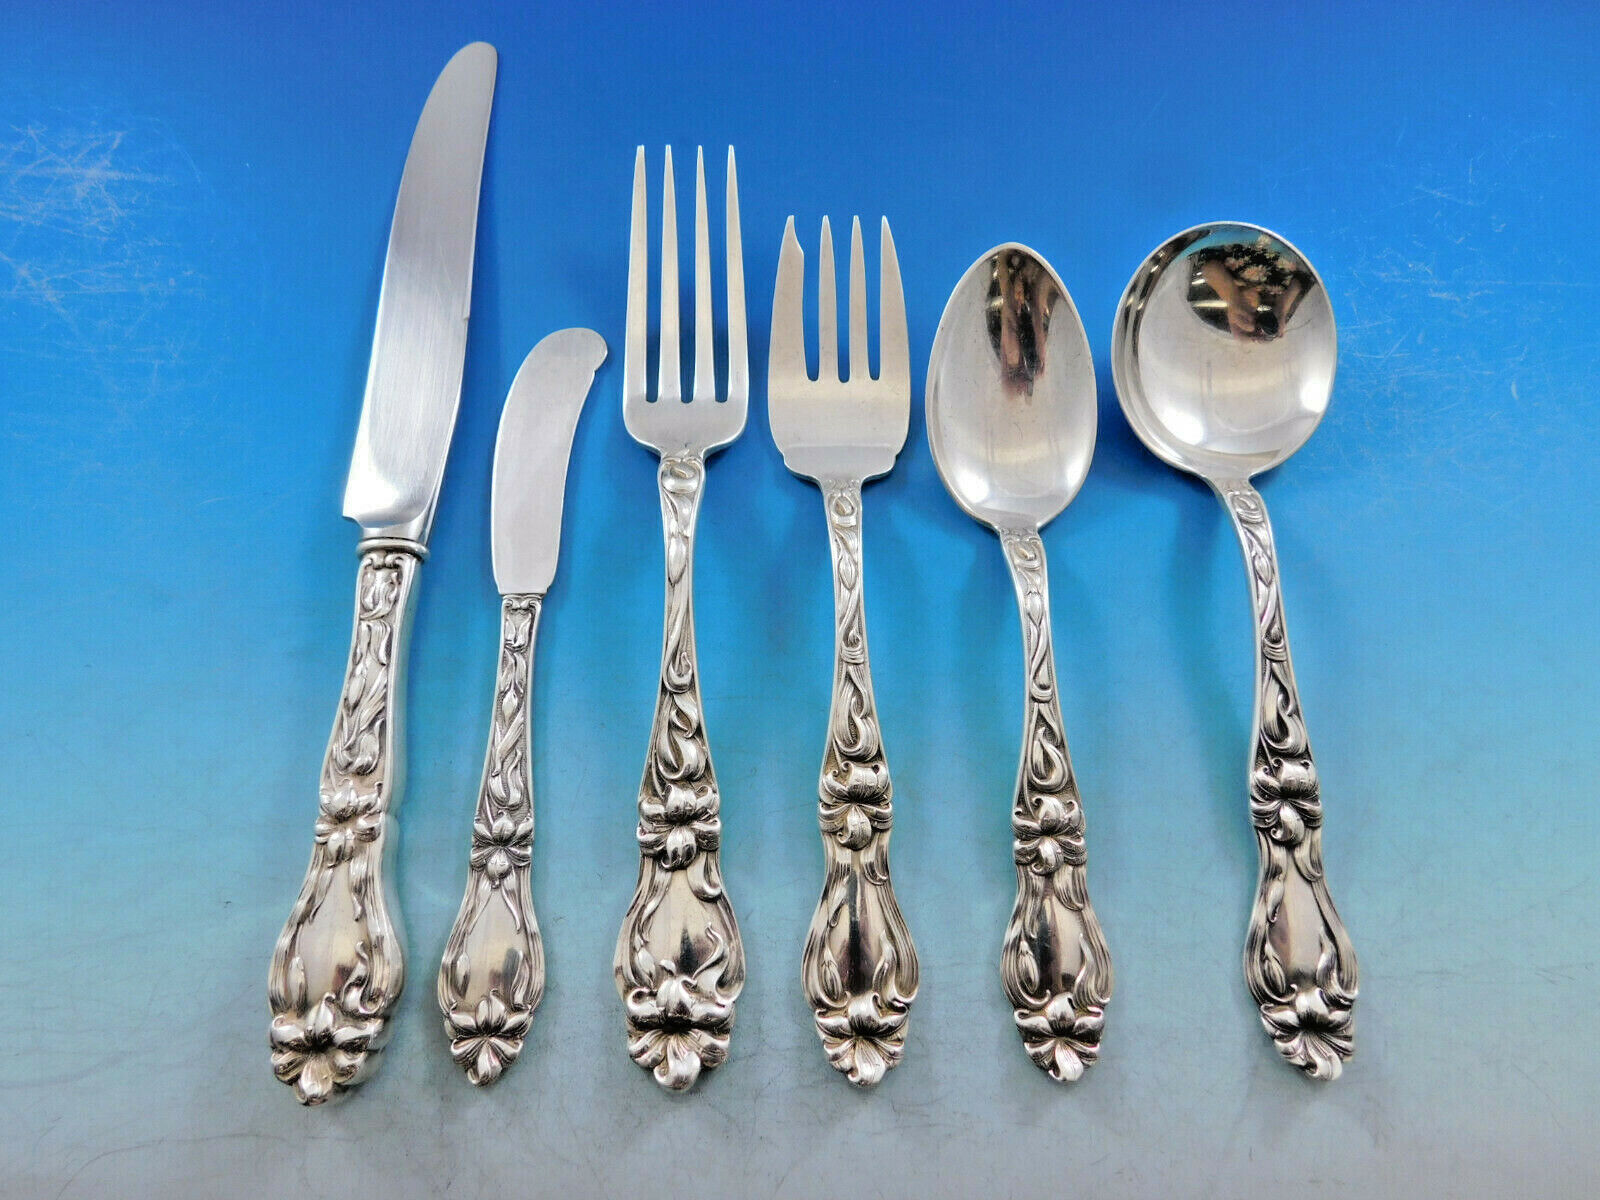 Lily by Frank Whiting Sterling Silver Flatware Service for 12 Set 73 pcs Floral